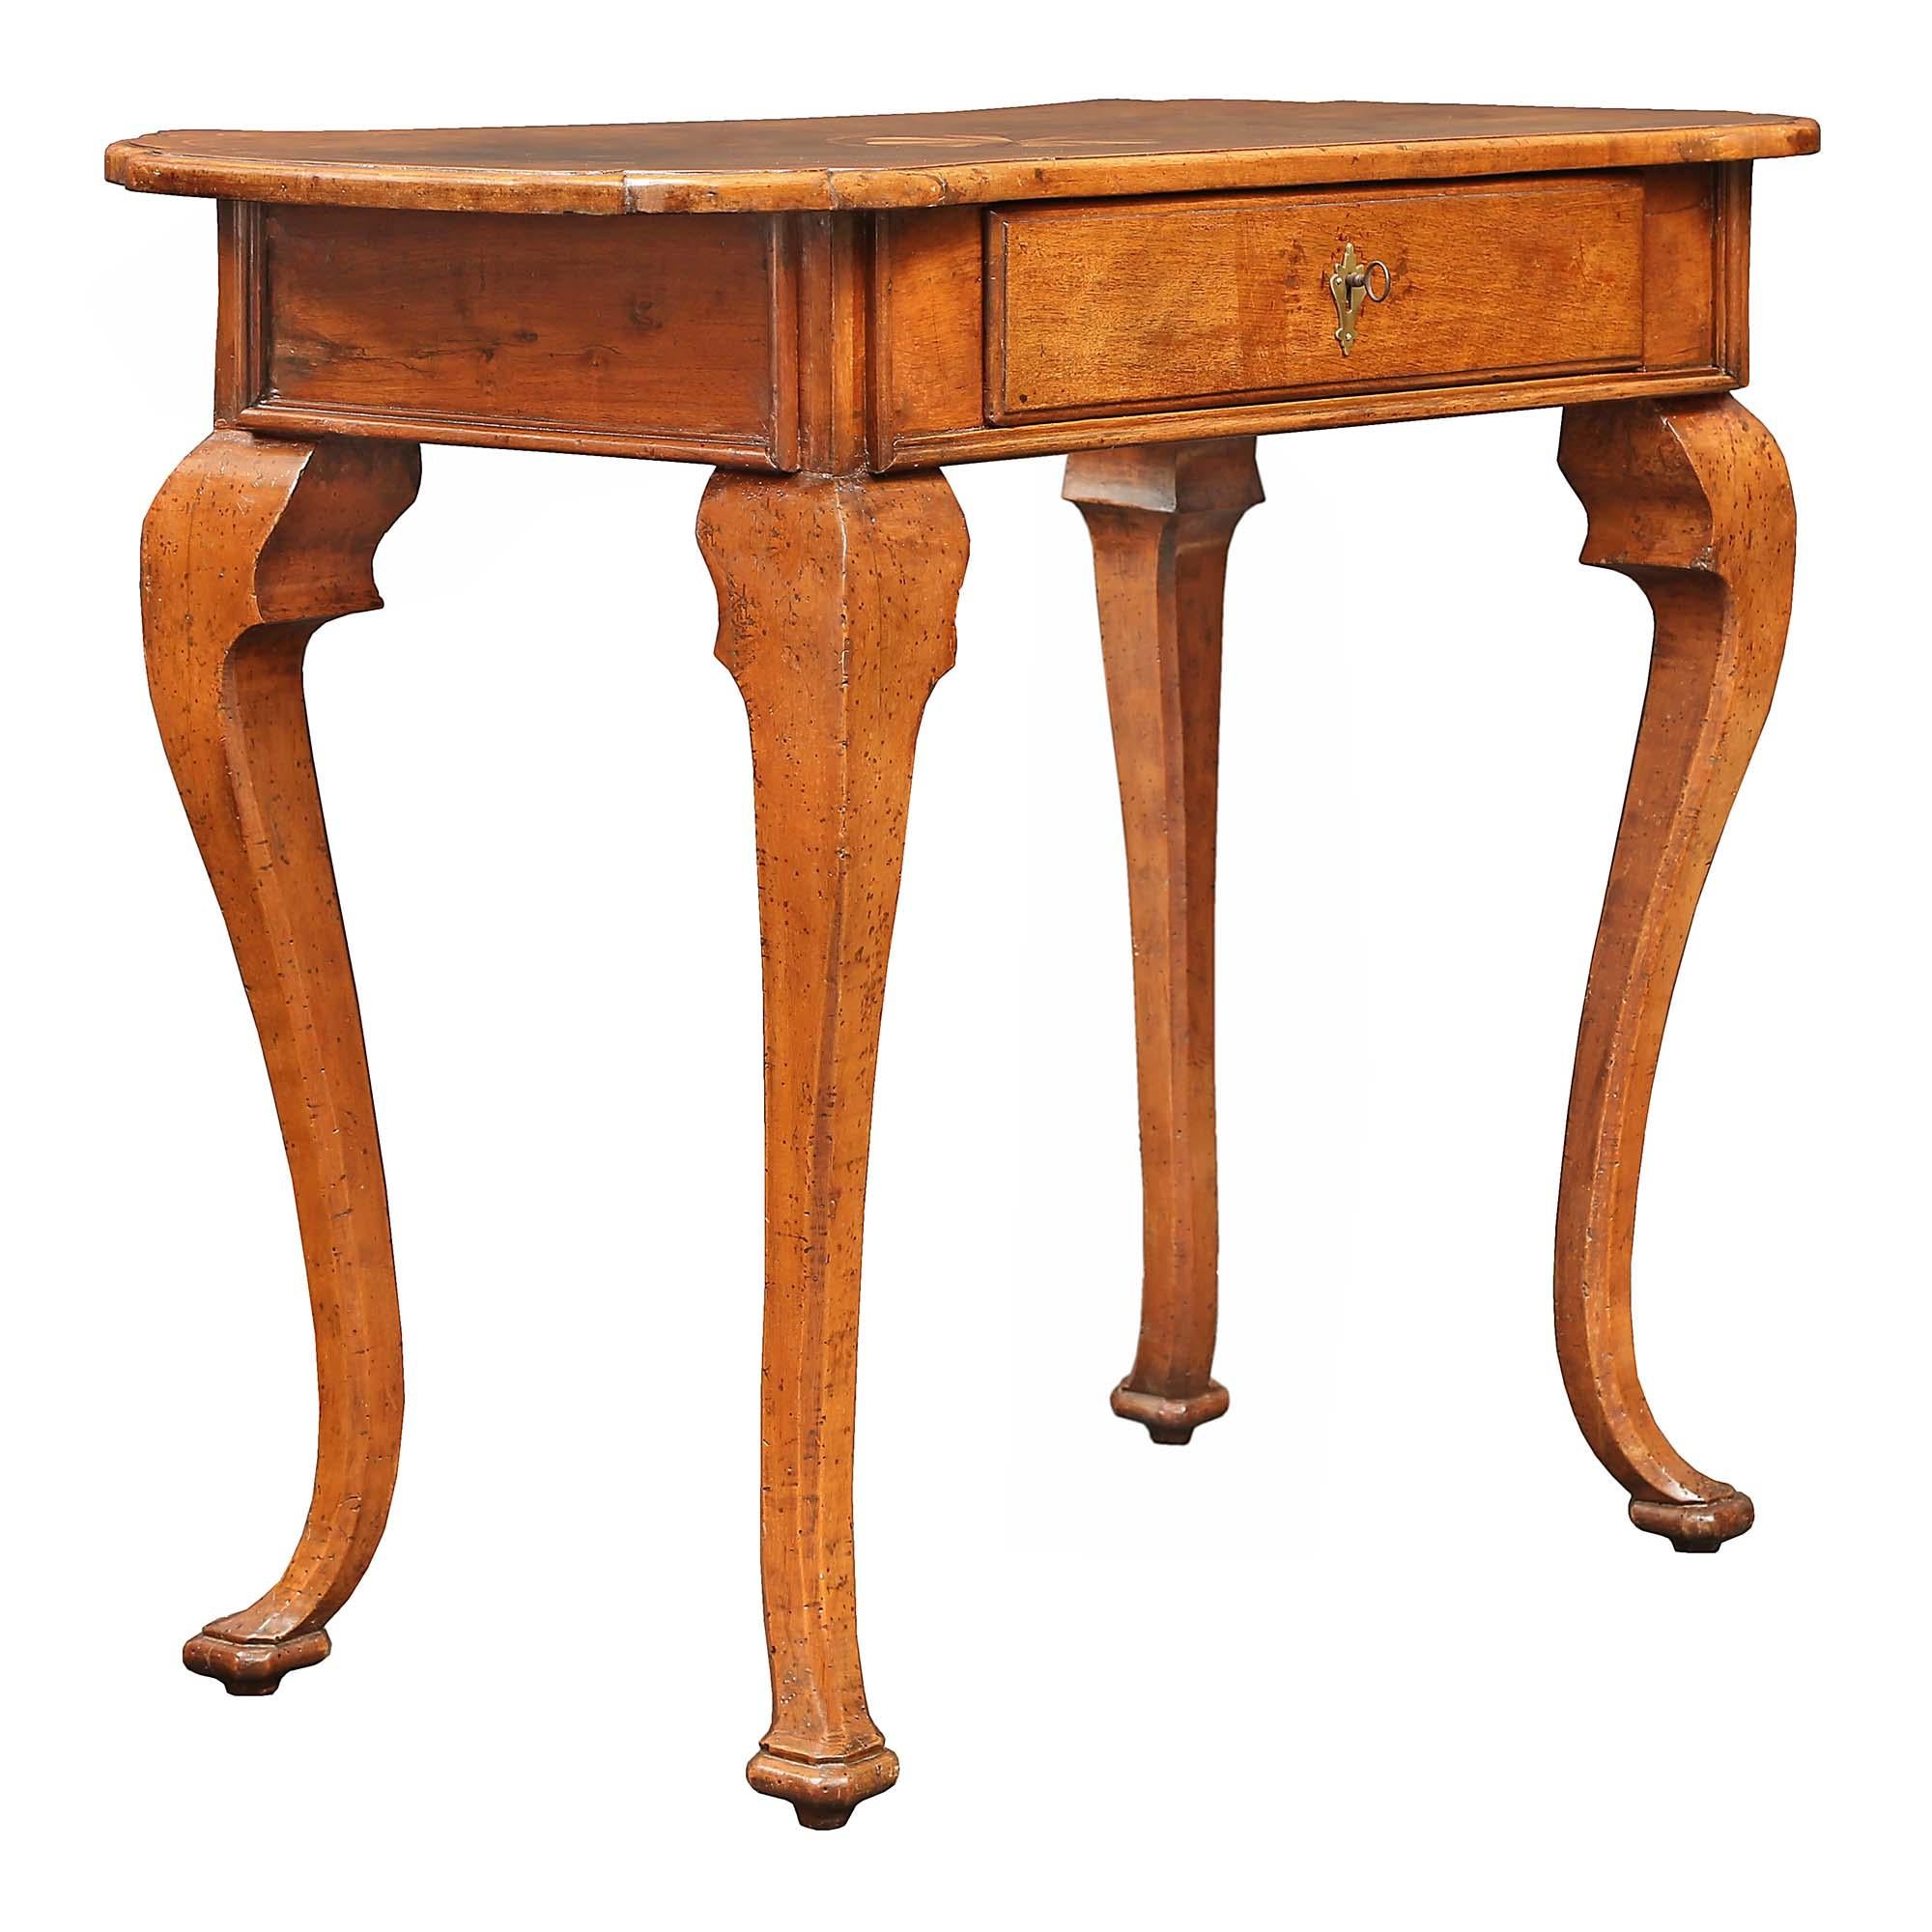 Italian 18th Century Louis XV Period Walnut Side Table from the Veneto Region In Good Condition For Sale In West Palm Beach, FL